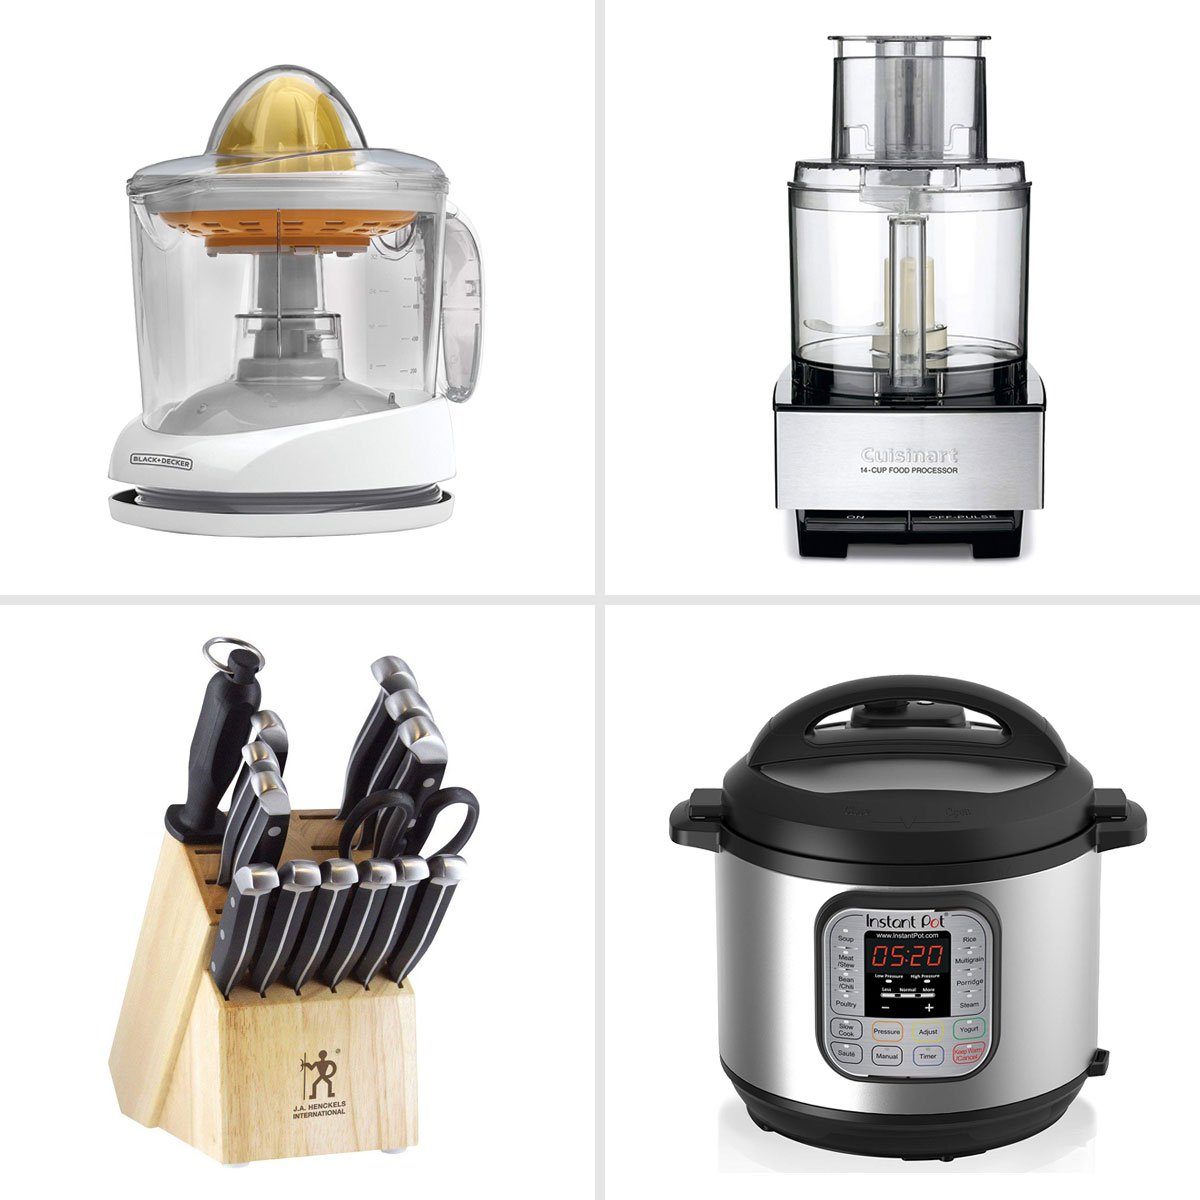 The Best-Value Kitchen Items You Should Buy on Prime Day